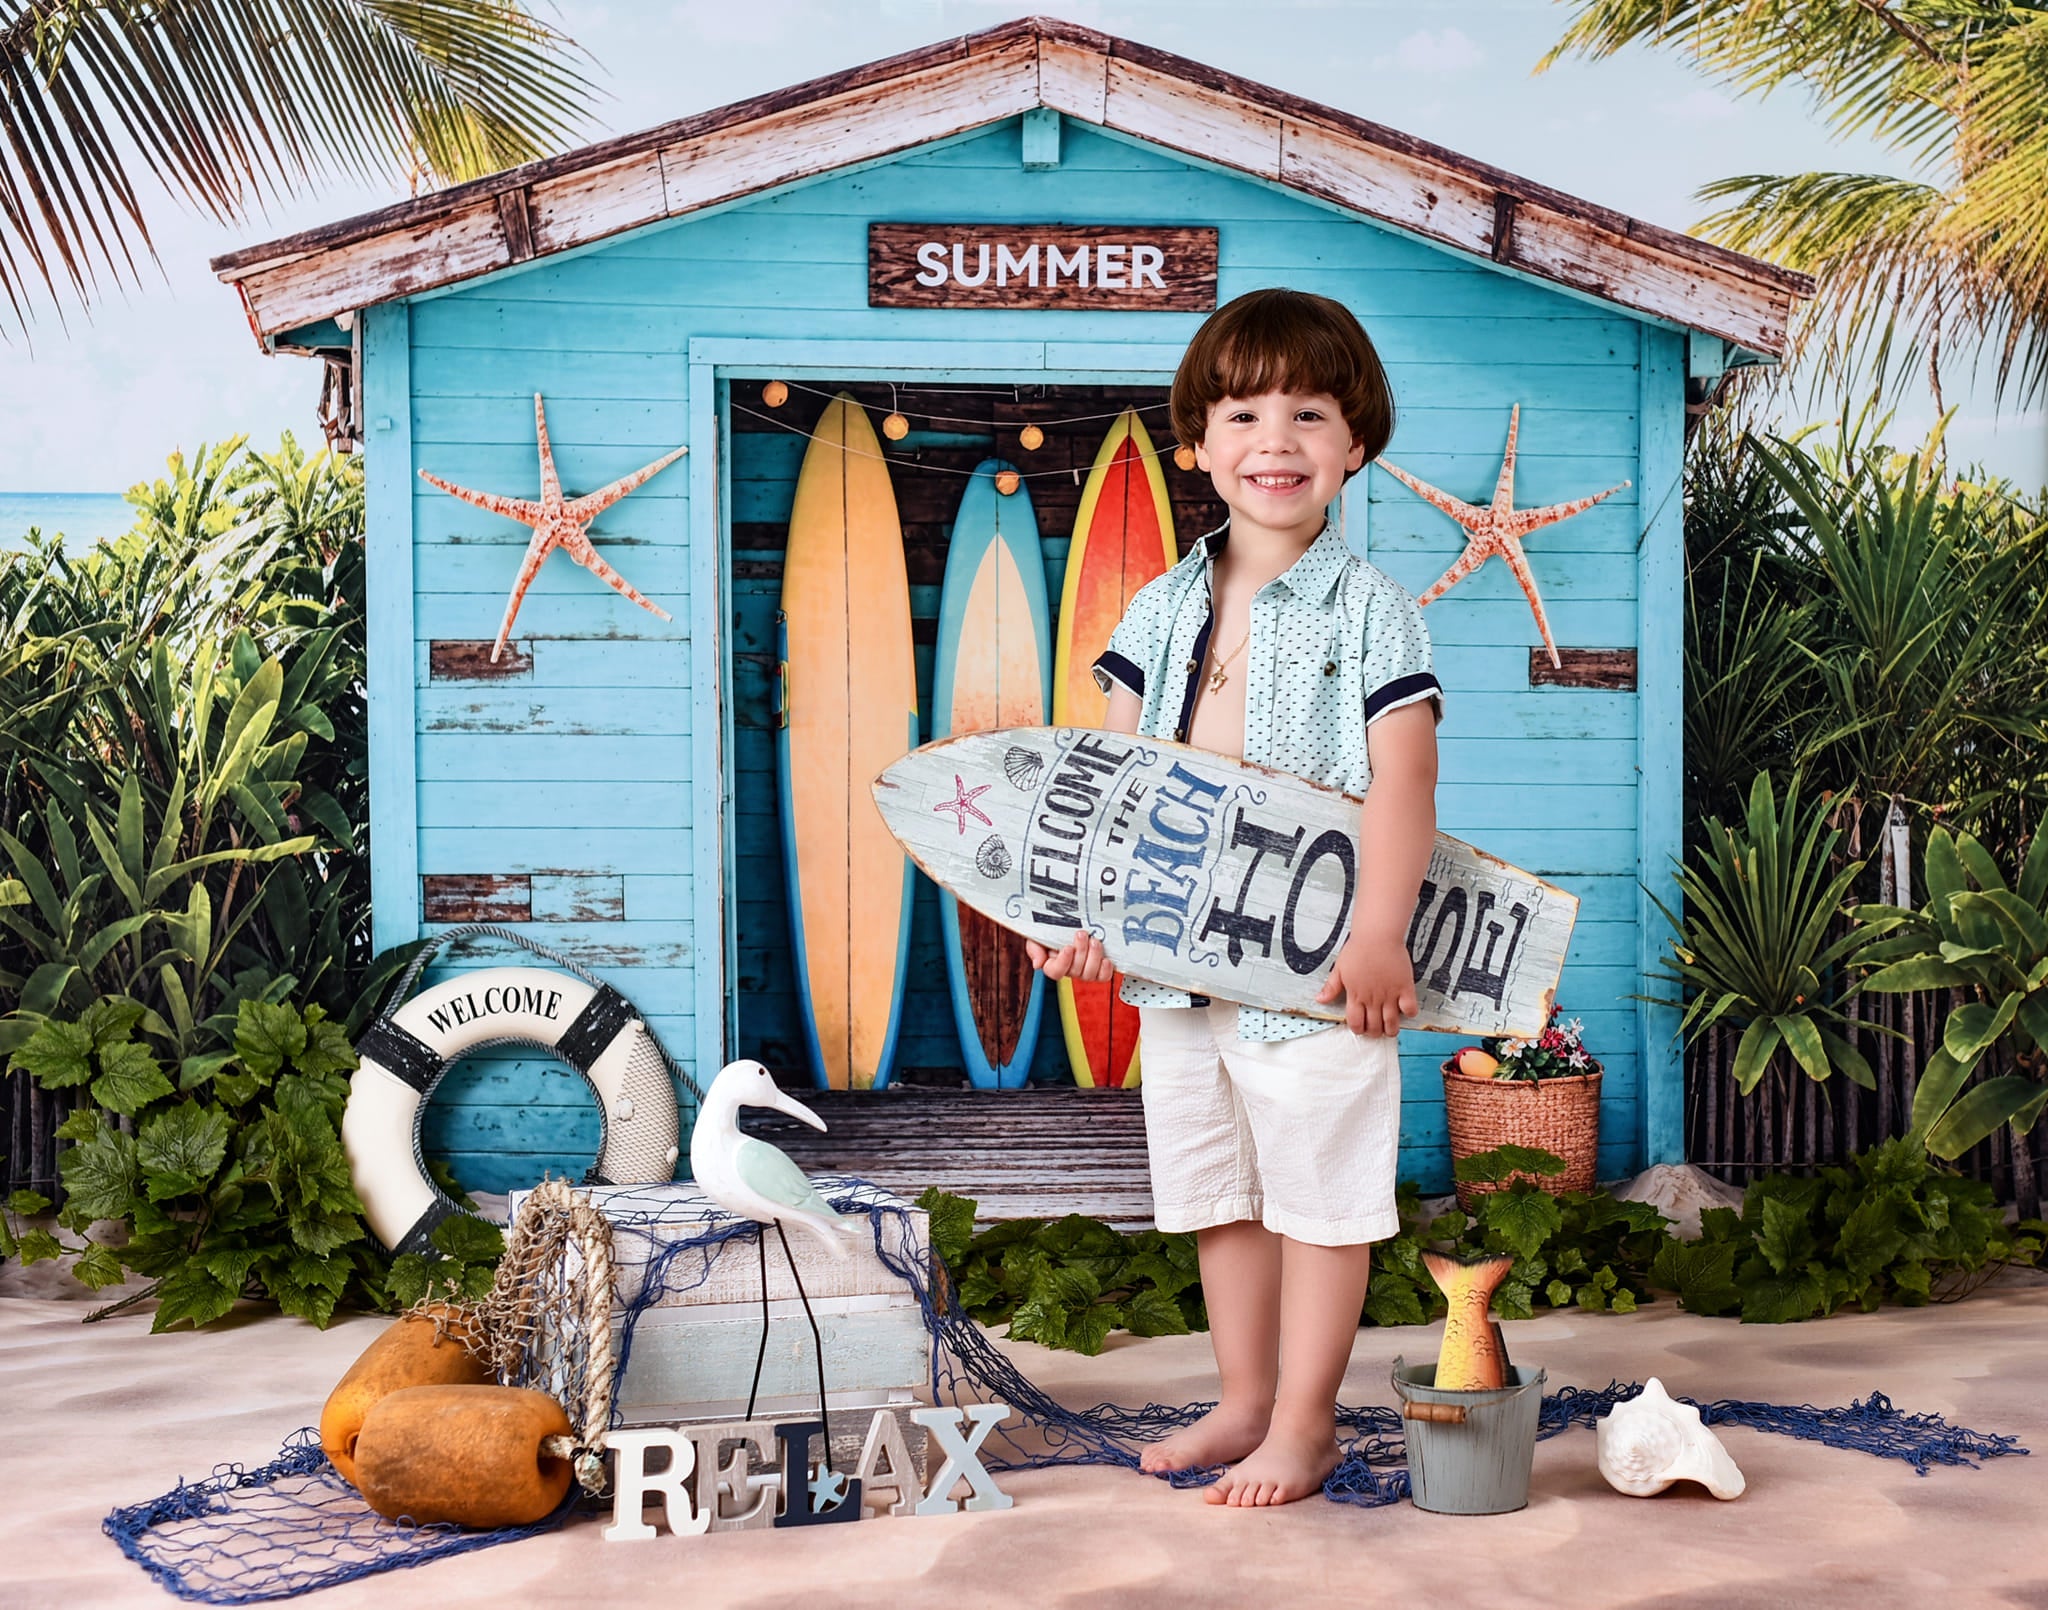 Kate Summer Beach Surfboard Shop Backdrop Designed by Chain Photography